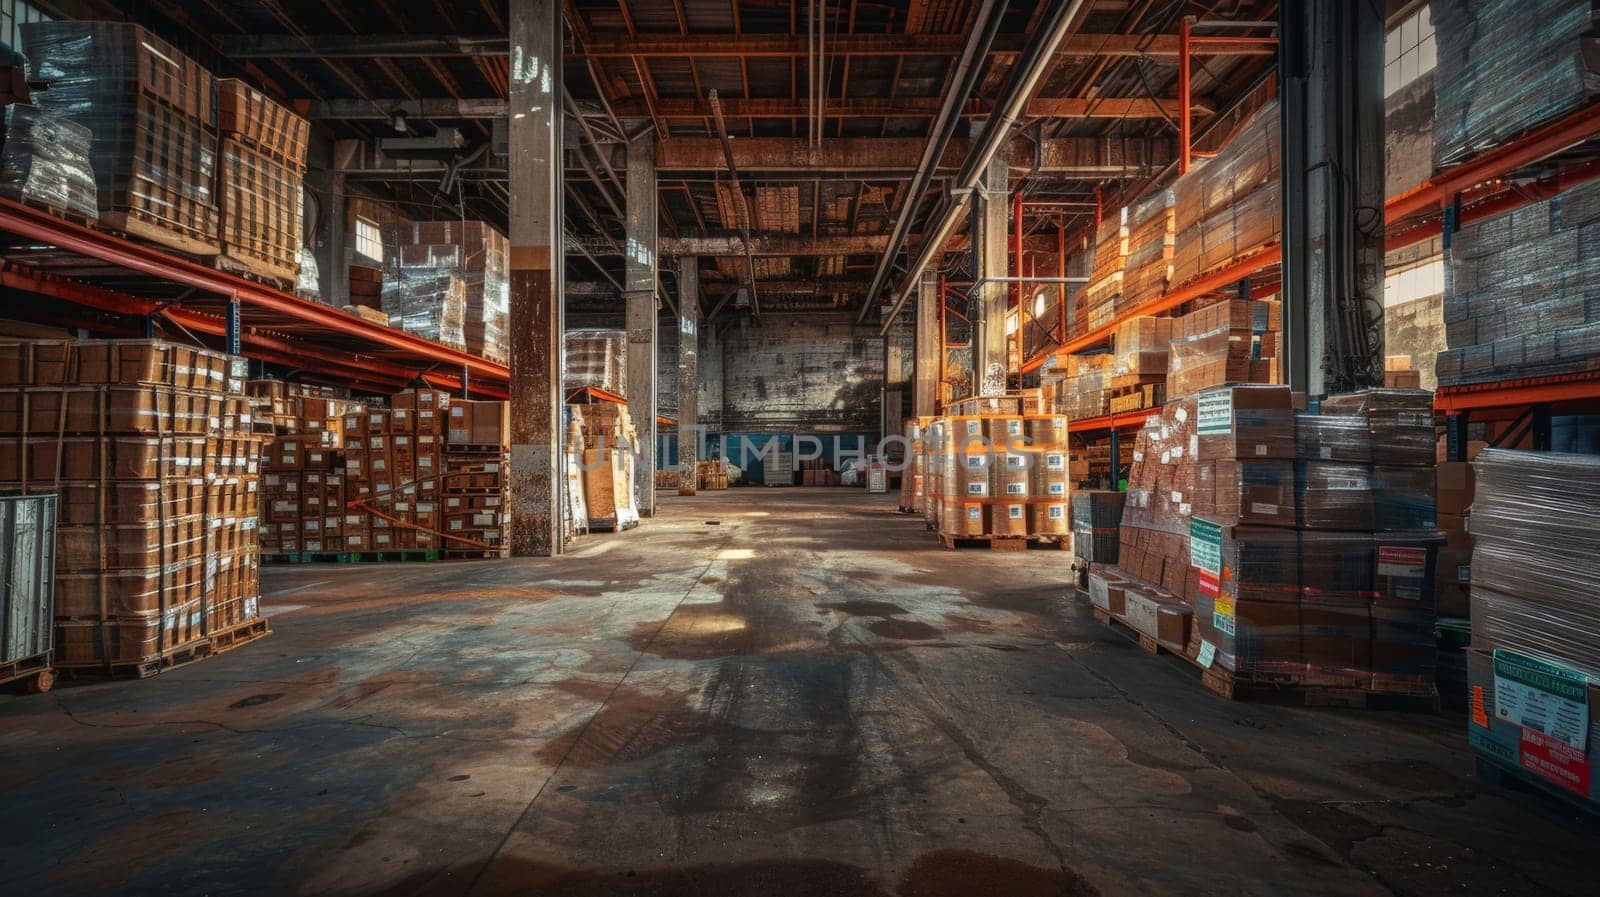 Photo of Warehouse Interior, Inventory Stacks, Industrial Environment by nijieimu